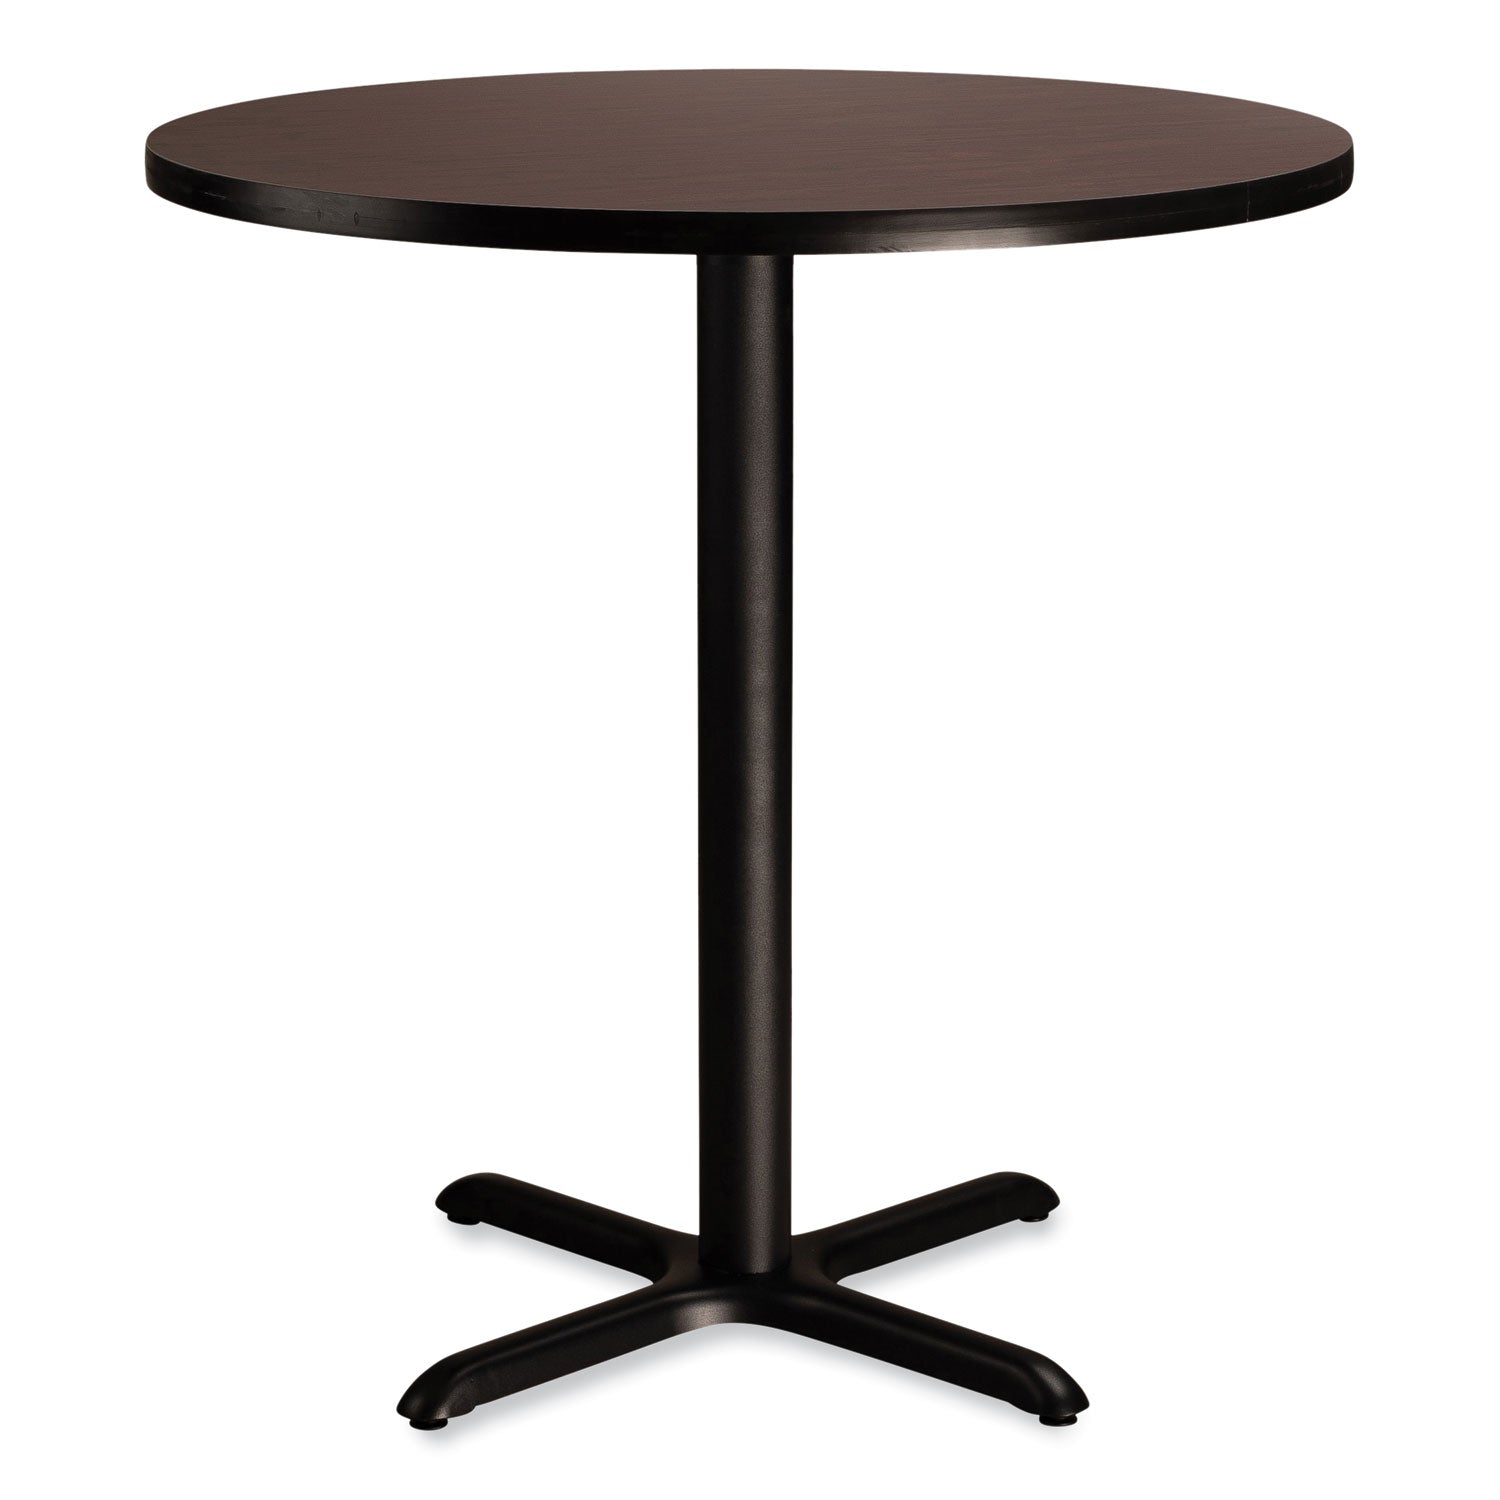 cafe-table-36-diameter-x-36h-round-top-x-base-mahogany-top-black-base-ships-in-7-10-business-days_npsct13636xc1my - 1